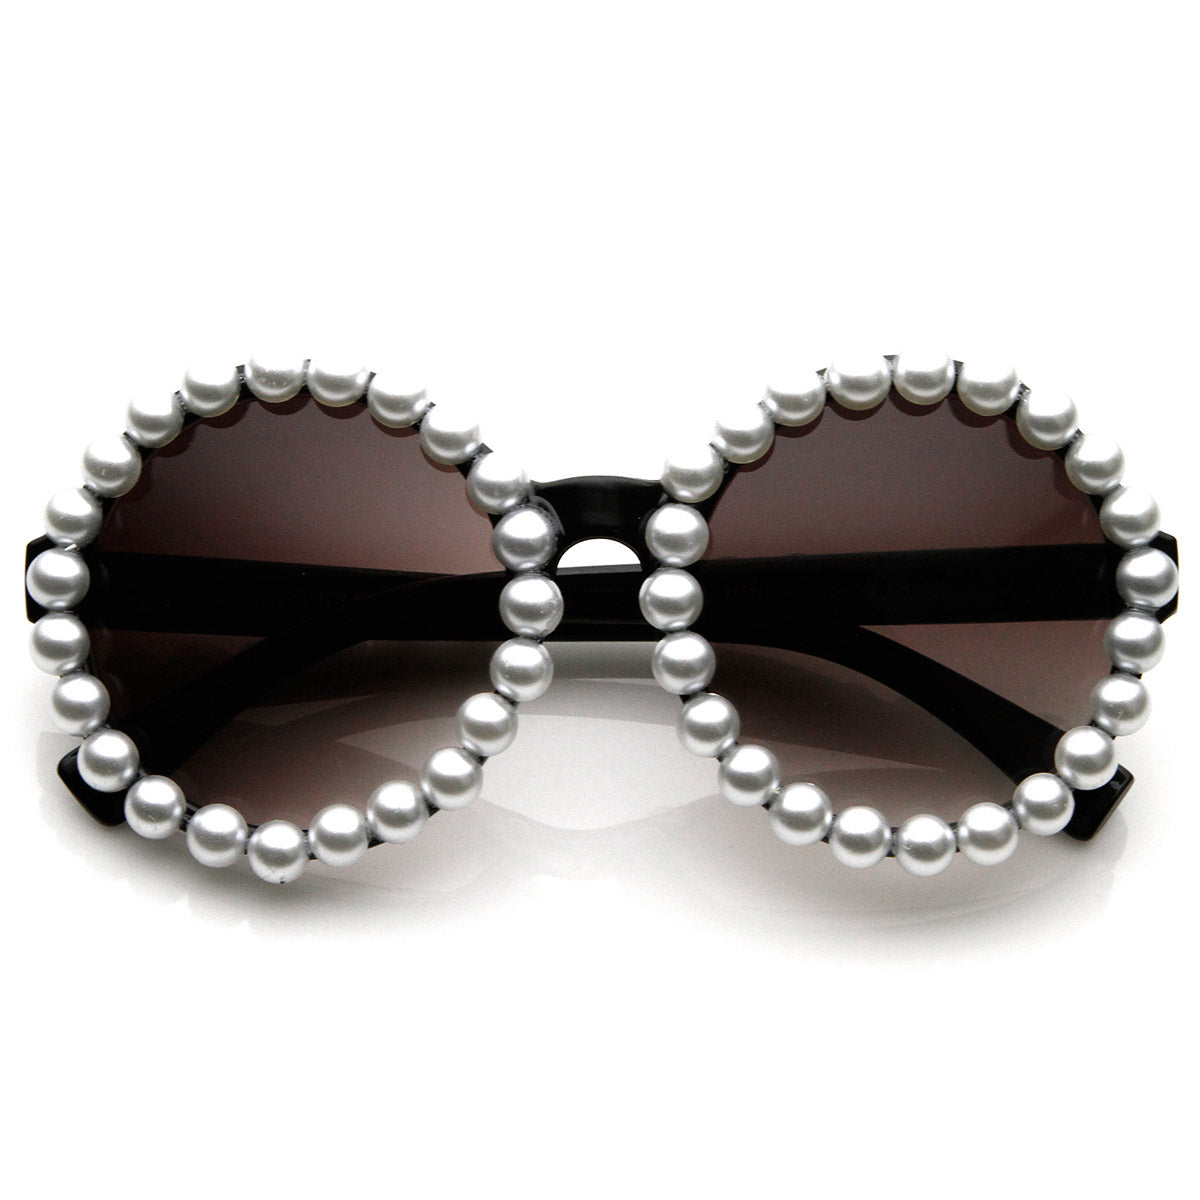 Pearl Round Sunglasses Women Small Frame Oval Vintage Sunglasses